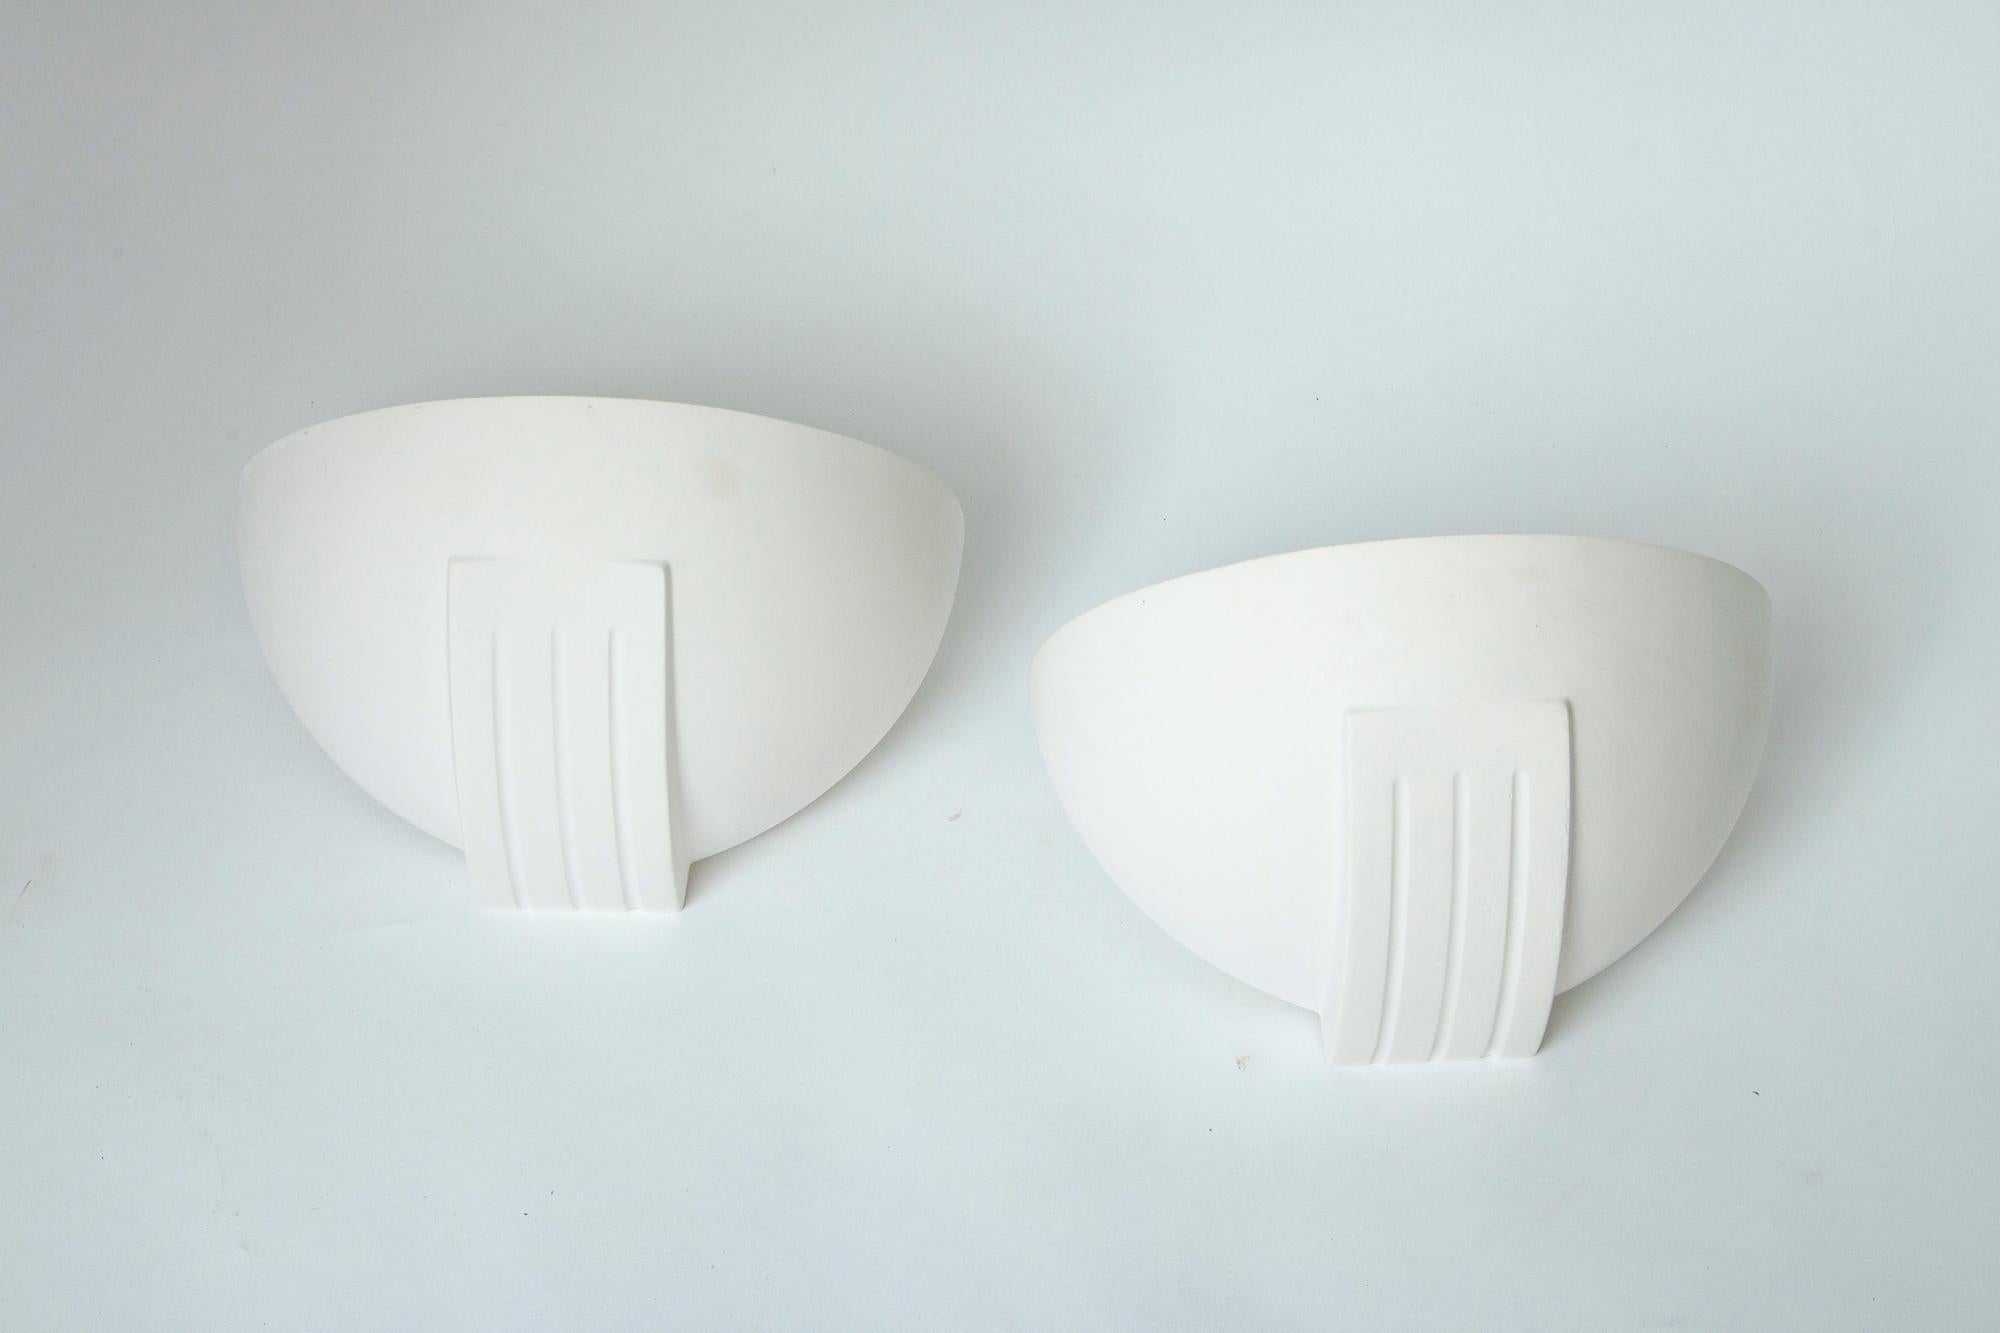 Four matching sconces
Extremely clean
Art Deco Revival from the 1970s-1980s
Price is for 1 pair of sconce ($3500 for two sconces)
ONLY  1 pair of sconces is available.